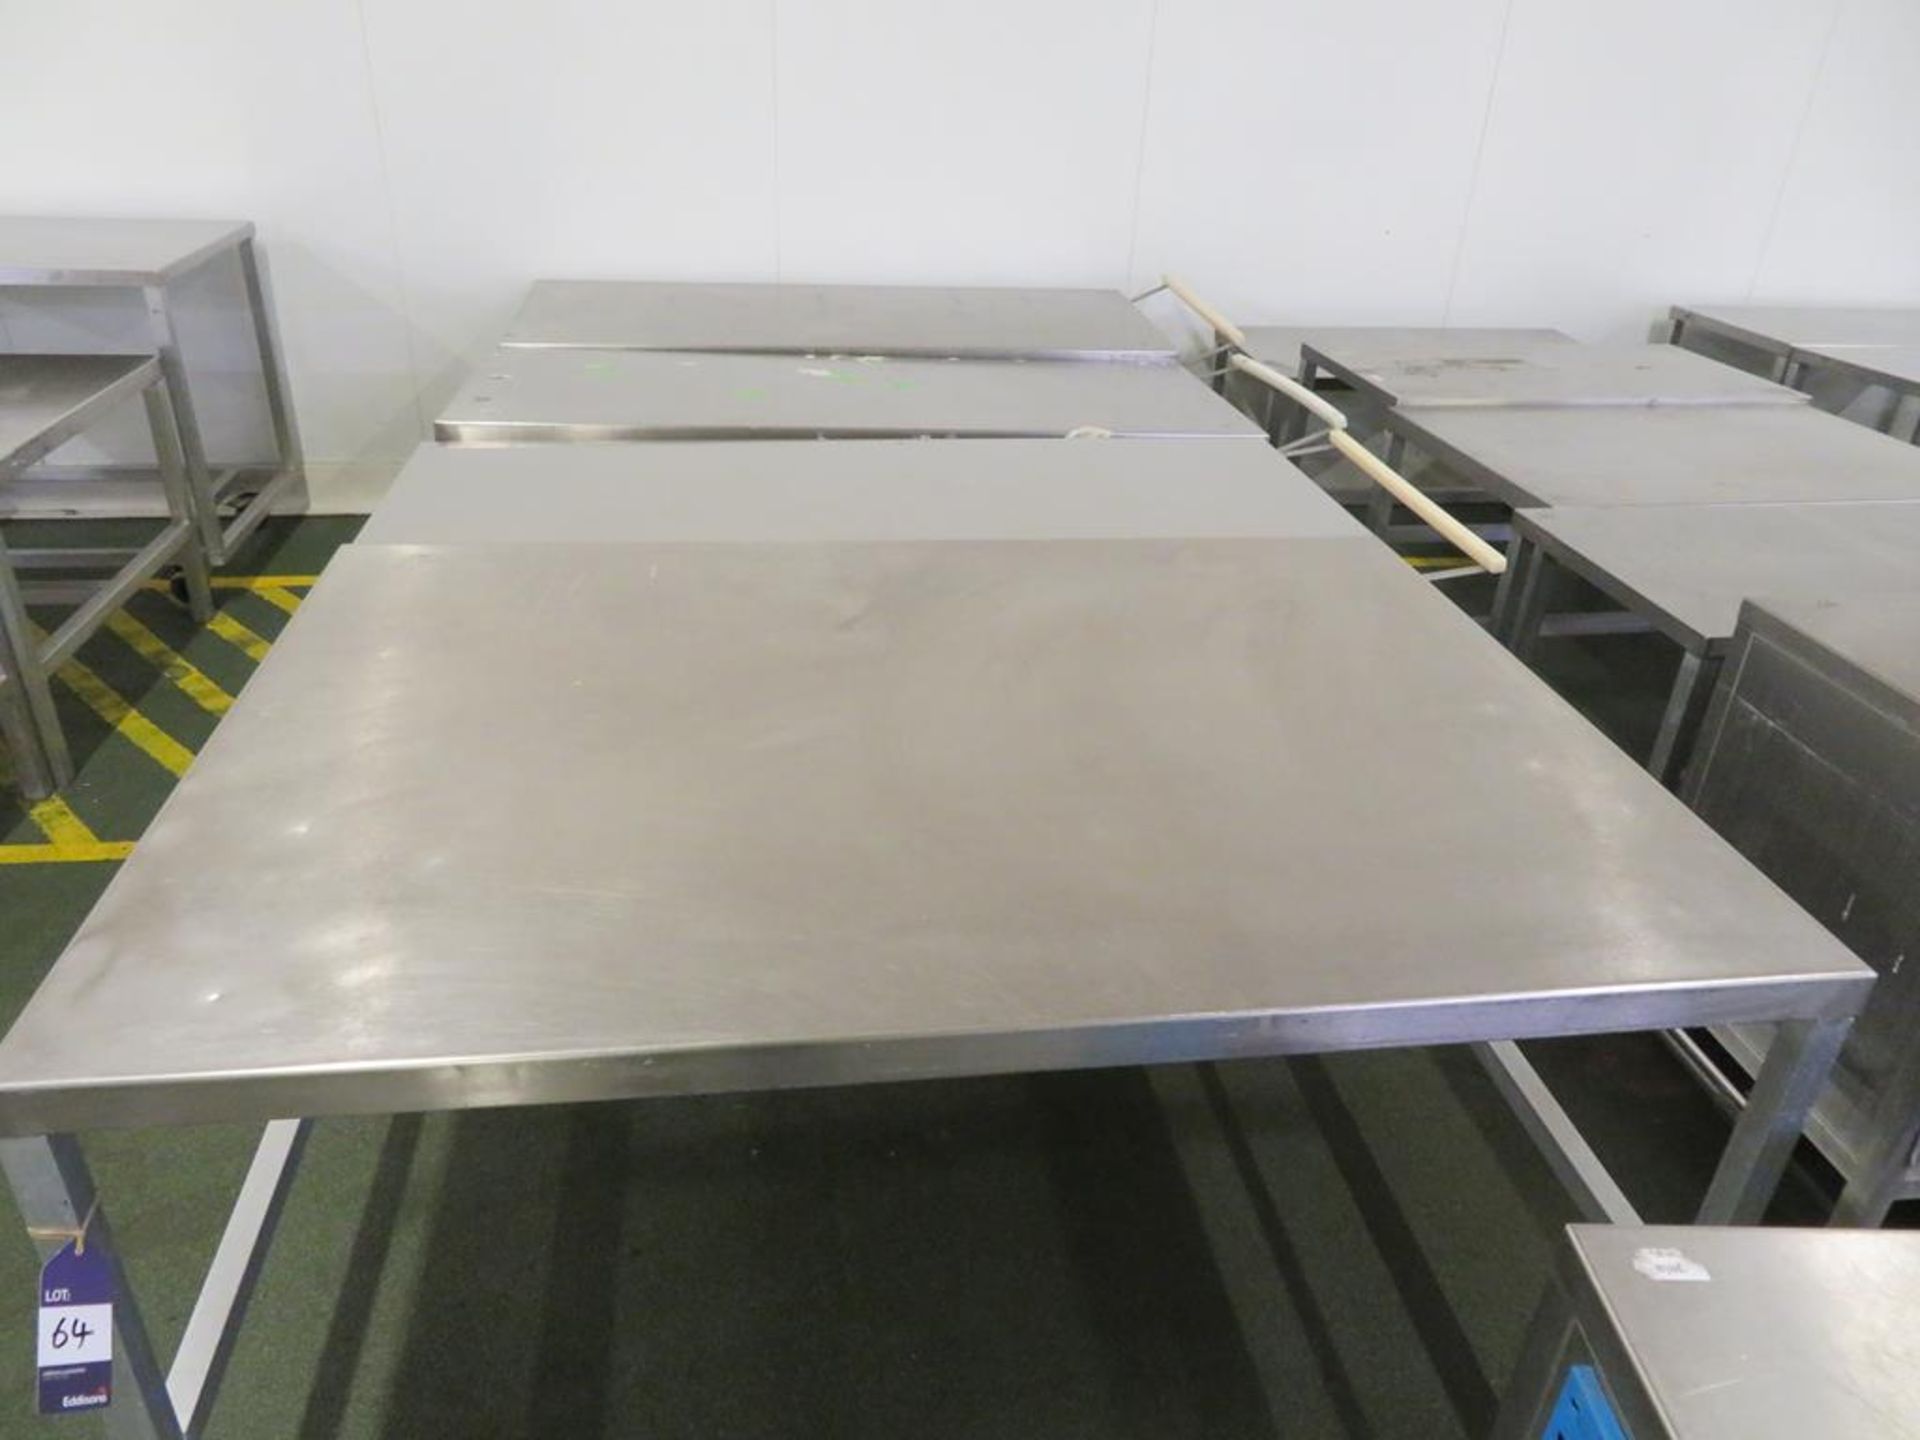 8 x Stainless Steel Topped Aluminium based Tables (the largest 1700 x 1200mm) and an open fronted ca